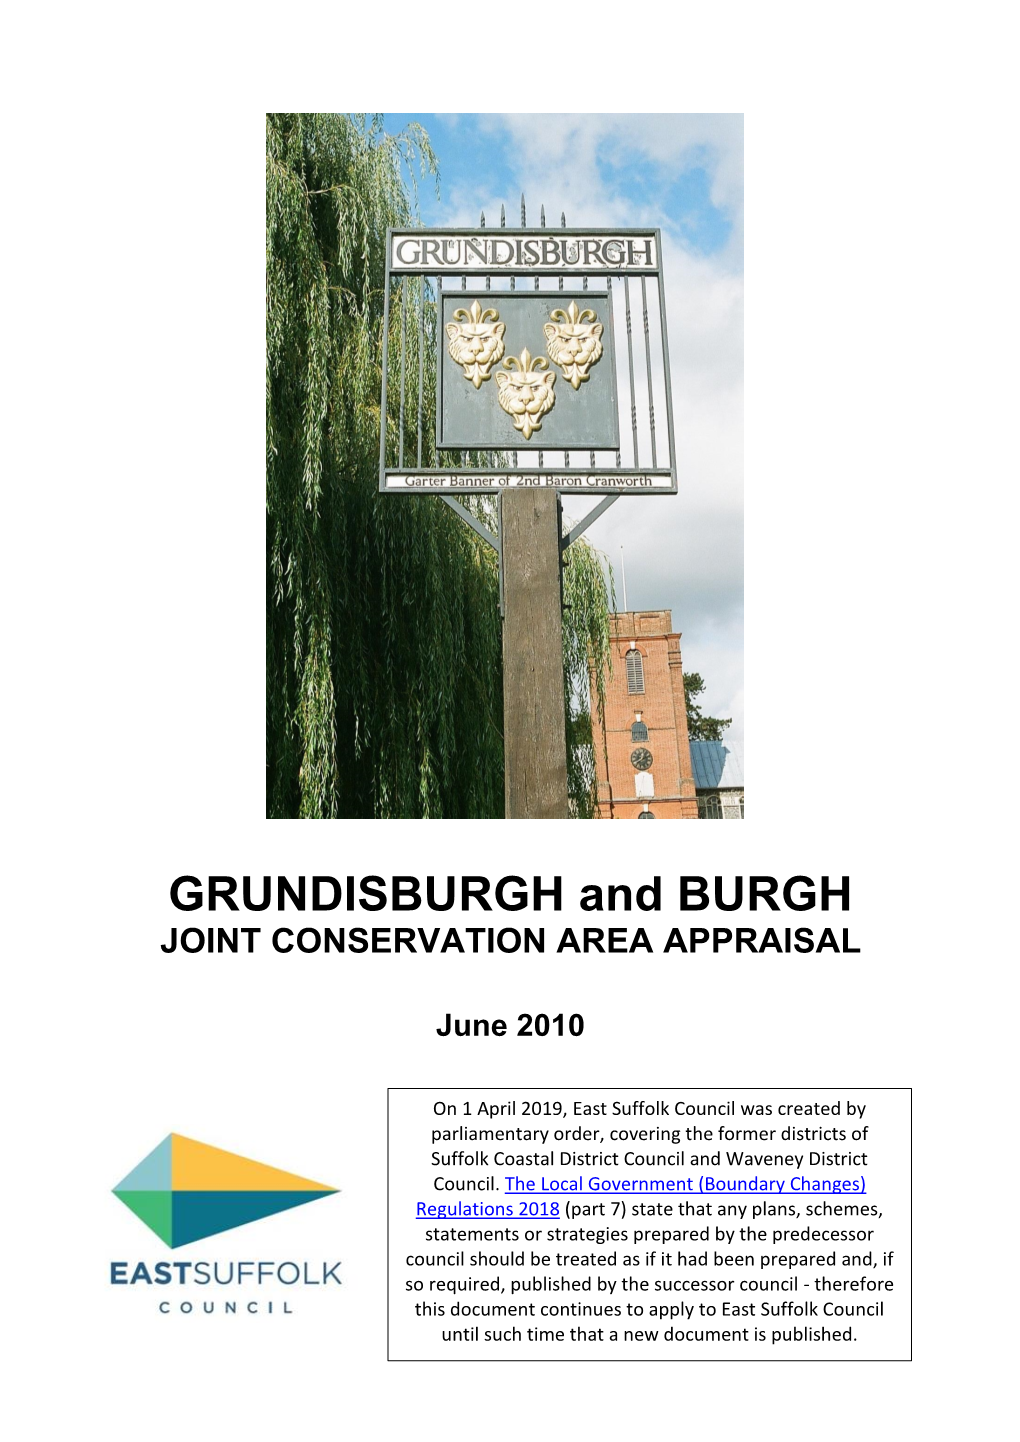 GRUNDISBURGH and BURGH JOINT CONSERVATION AREA APPRAISAL